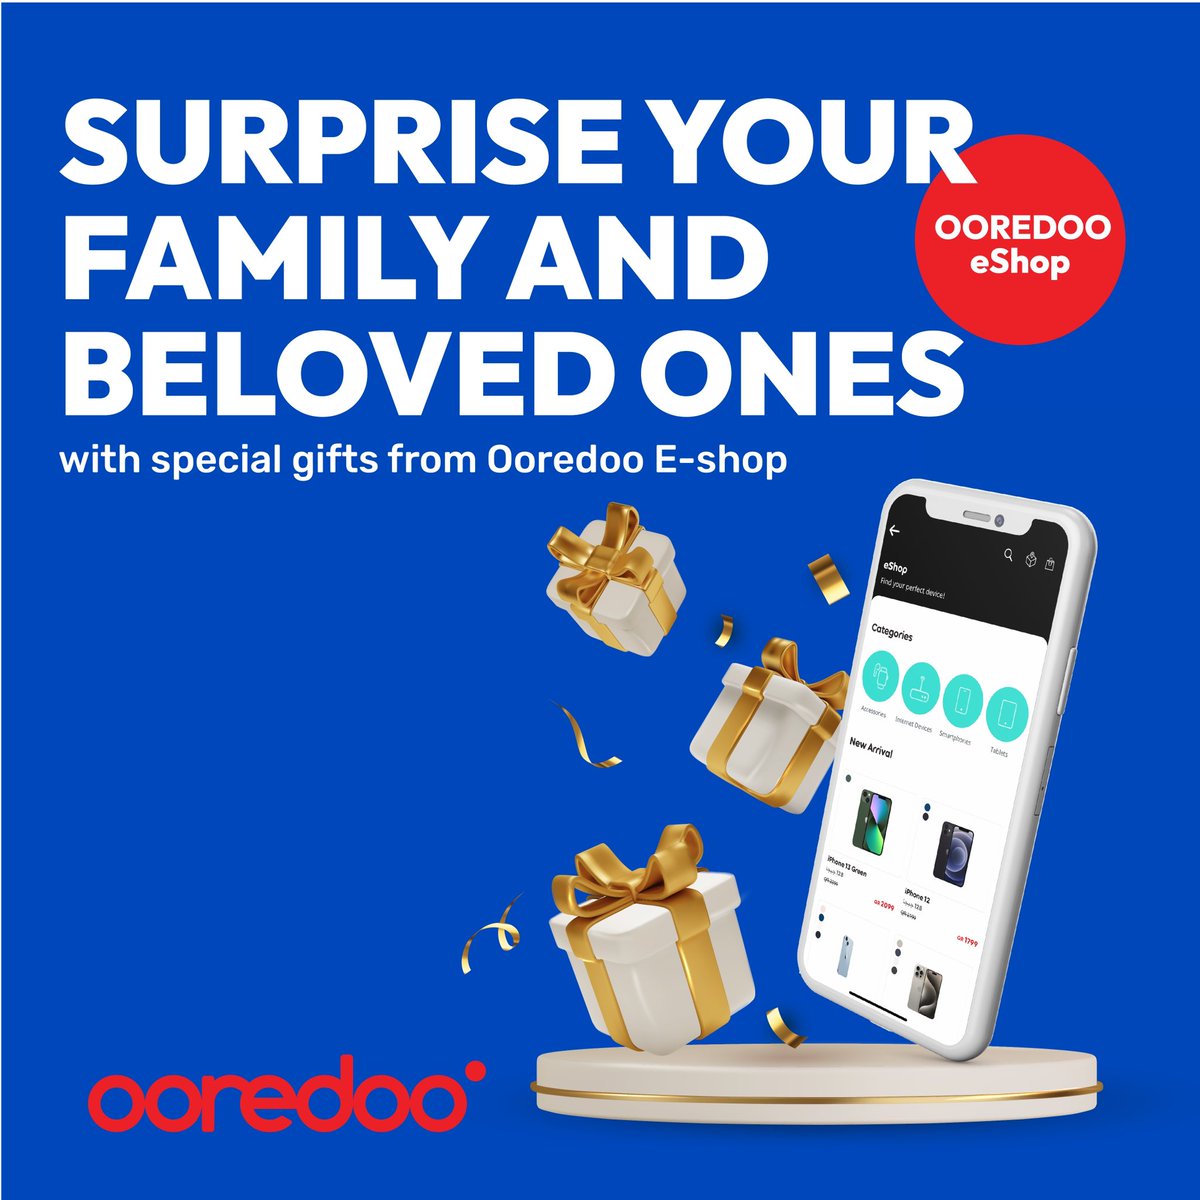 🔴
surprise your family and beloved ones with special gifts from Ooredoo E-shop ooredoo.qa/eshop/home
#UpgradeYourWorld #Ooredoo